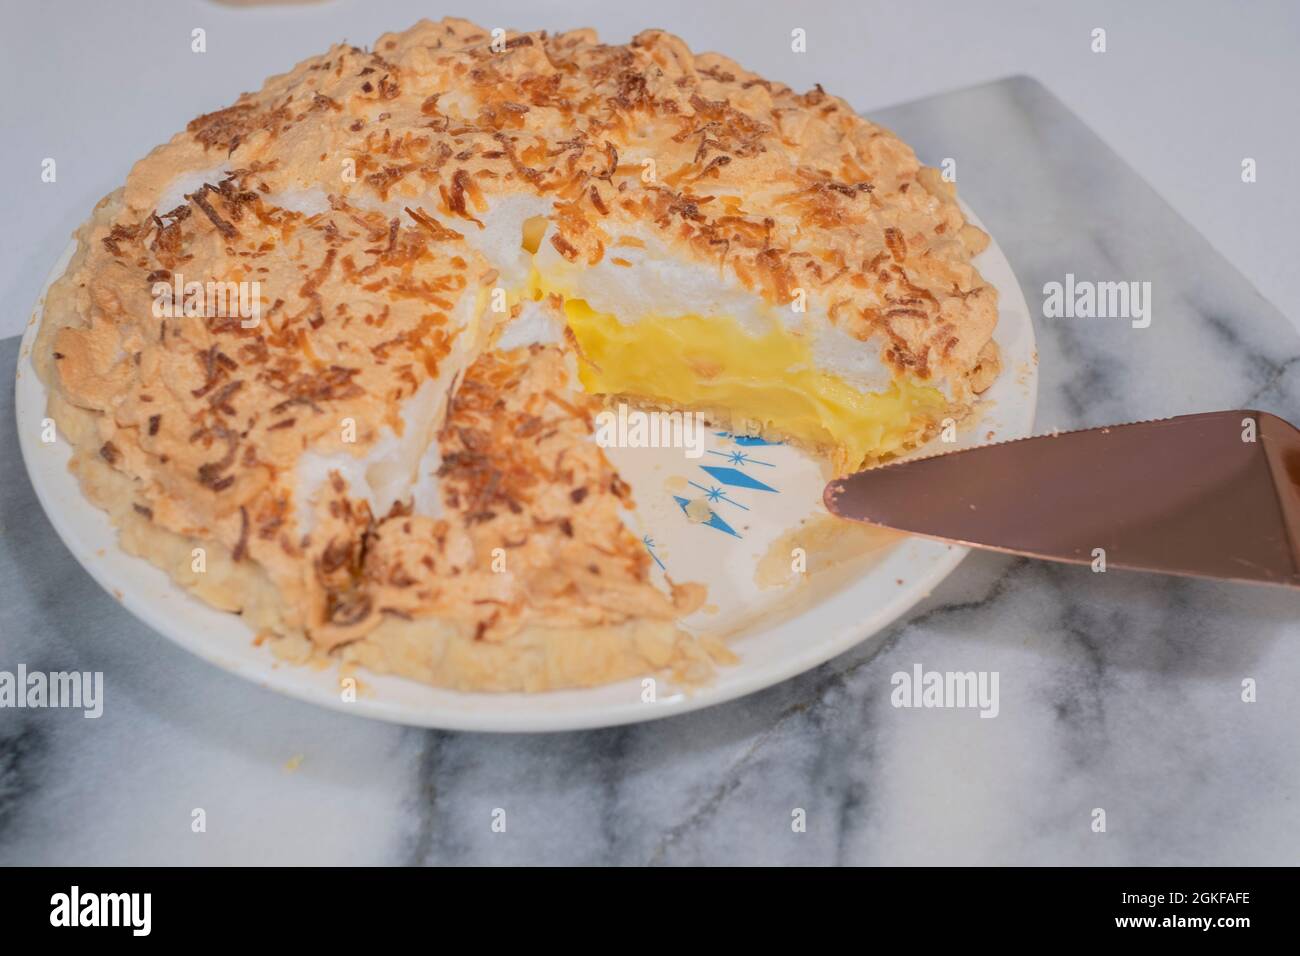 Homemade Coconut Meringue Cream pie  and serving utensil, with one slice gone, placed on a marble slab. USA. Stock Photo